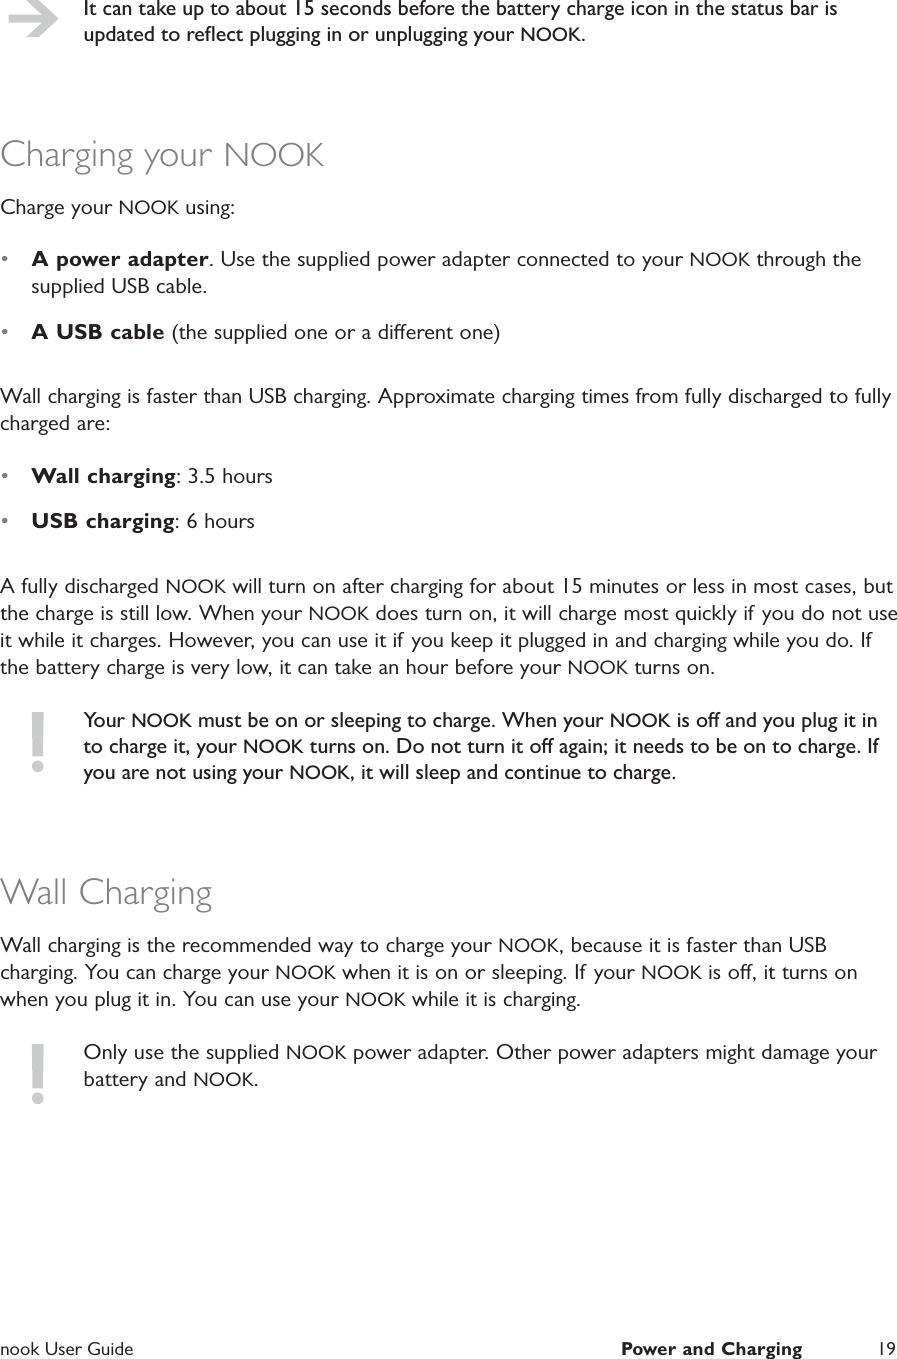  nook User Guide  Power and Charging 19It can take up to about 15 seconds before the battery charge icon in the status bar is updated to reﬂect plugging in or unplugging your NOOK.Charging your NOOKCharge your NOOK using:•  A power adapter. Use the supplied power adapter connected to your NOOK through the supplied USB cable.•  A USB cable (the supplied one or a dierent one)Wall charging is faster than USB charging. Approximate charging times from fully discharged to fully charged are:•  Wall charging: 3.5 hours•  USB charging: 6 hoursA fully discharged NOOK will turn on after charging for about 15 minutes or less in most cases, but the charge is still low. When your NOOK does turn on, it will charge most quickly if  you do not use it while it charges. However, you can use it if you keep it plugged in and charging while you do. If the battery charge is very low, it can take an hour before your NOOK turns on.Your NOOK must be on or sleeping to charge. When your NOOK is o and you plug it in to charge it, your NOOK turns on. Do not turn it o again; it needs to be on to charge. If you are not using your NOOK, it will sleep and continue to charge.Wall ChargingWall charging is the recommended way to charge your NOOK, because it is faster than USB charging. You can charge your NOOK when it is on or sleeping. If your NOOK is o, it turns on when you plug it in. You can use your NOOK while it is charging.Only use the supplied NOOK power adapter. Other power adapters might damage your battery and NOOK.